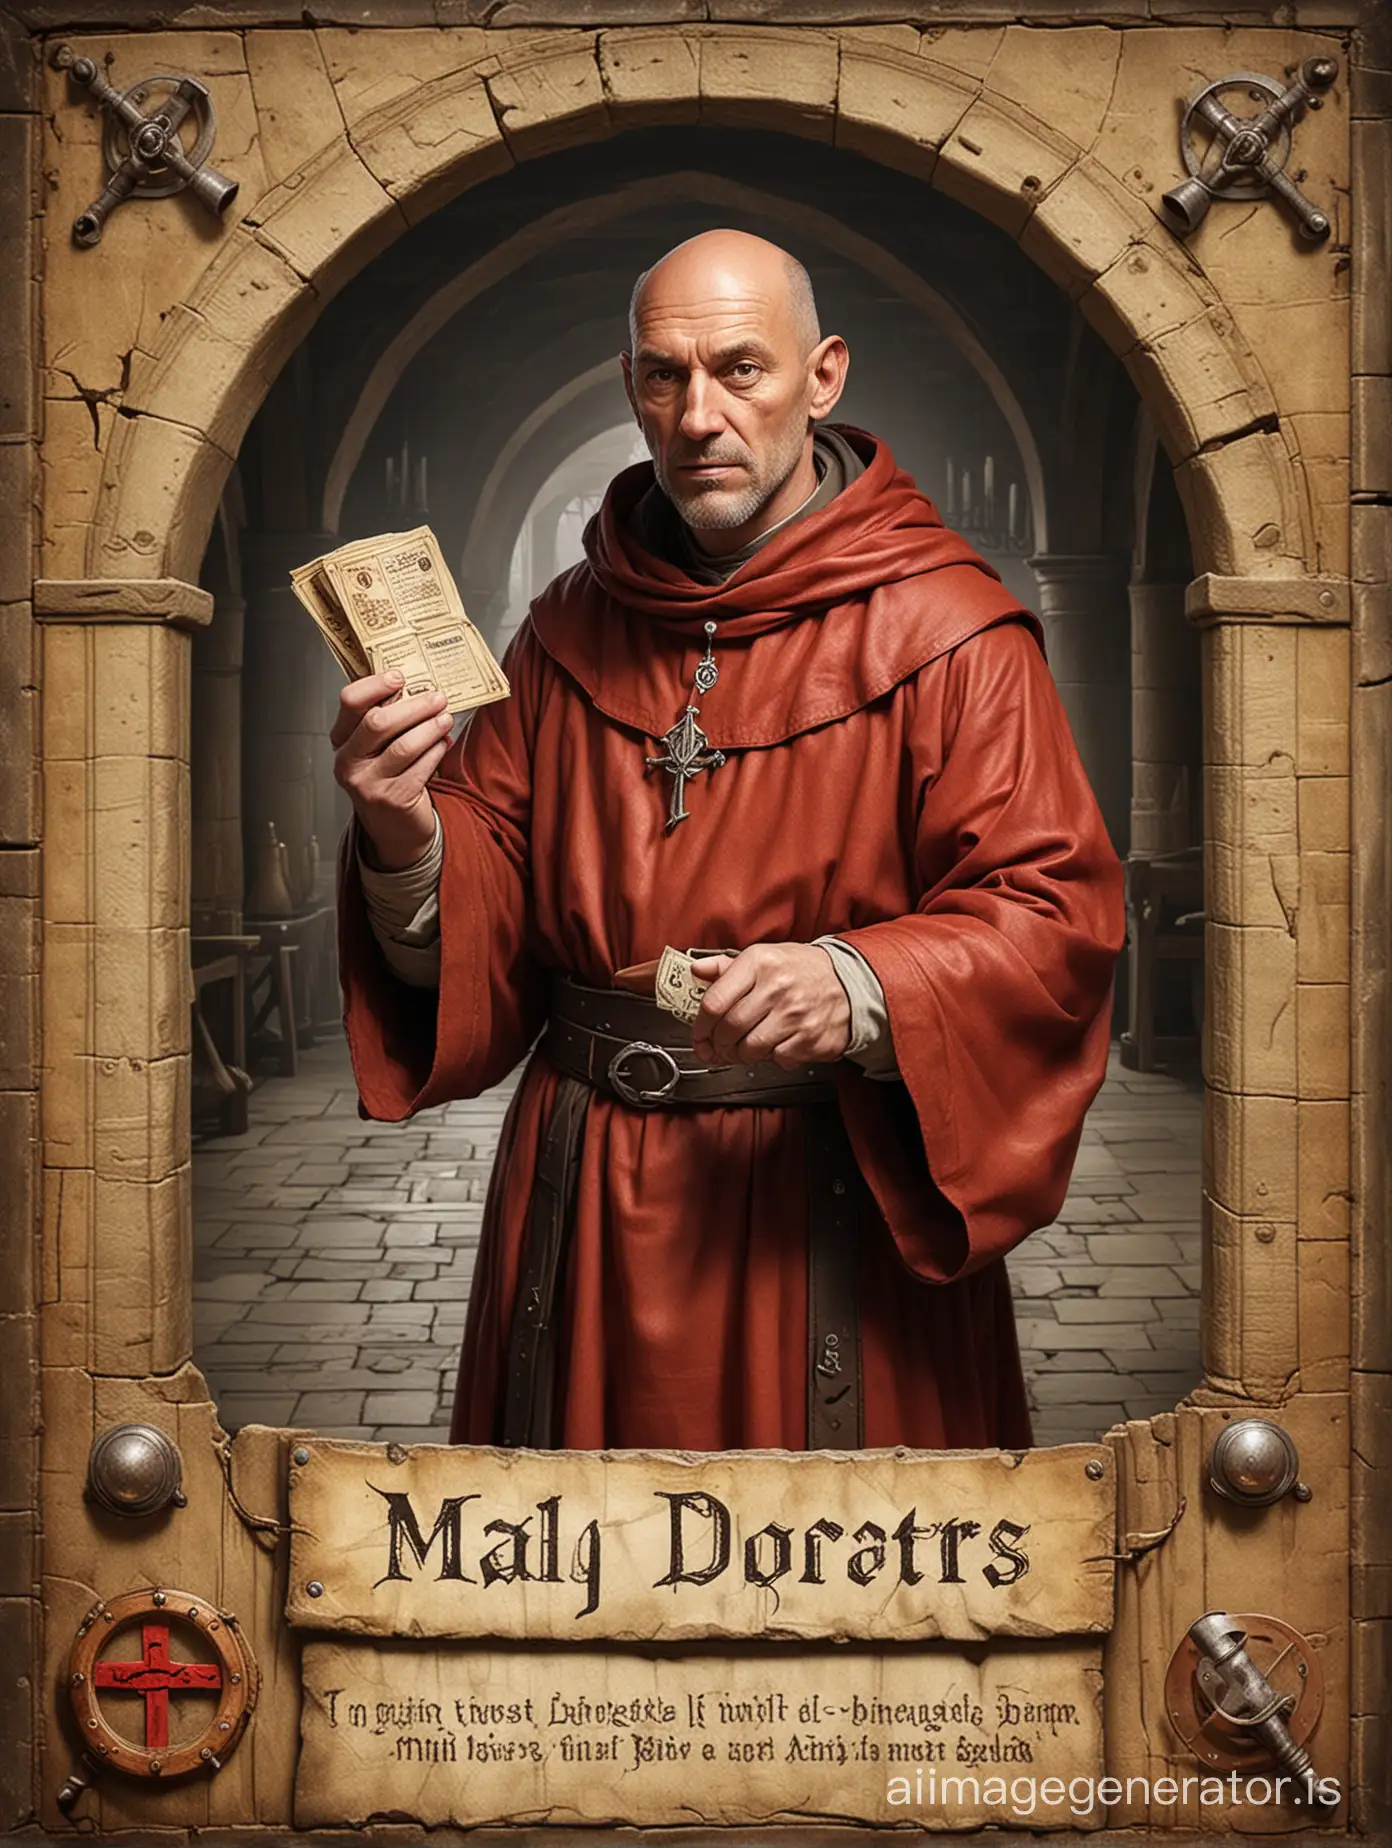 create a board game card representing a medieval inquisitor monk priest, in a monastery, aged 50, specialist in torture